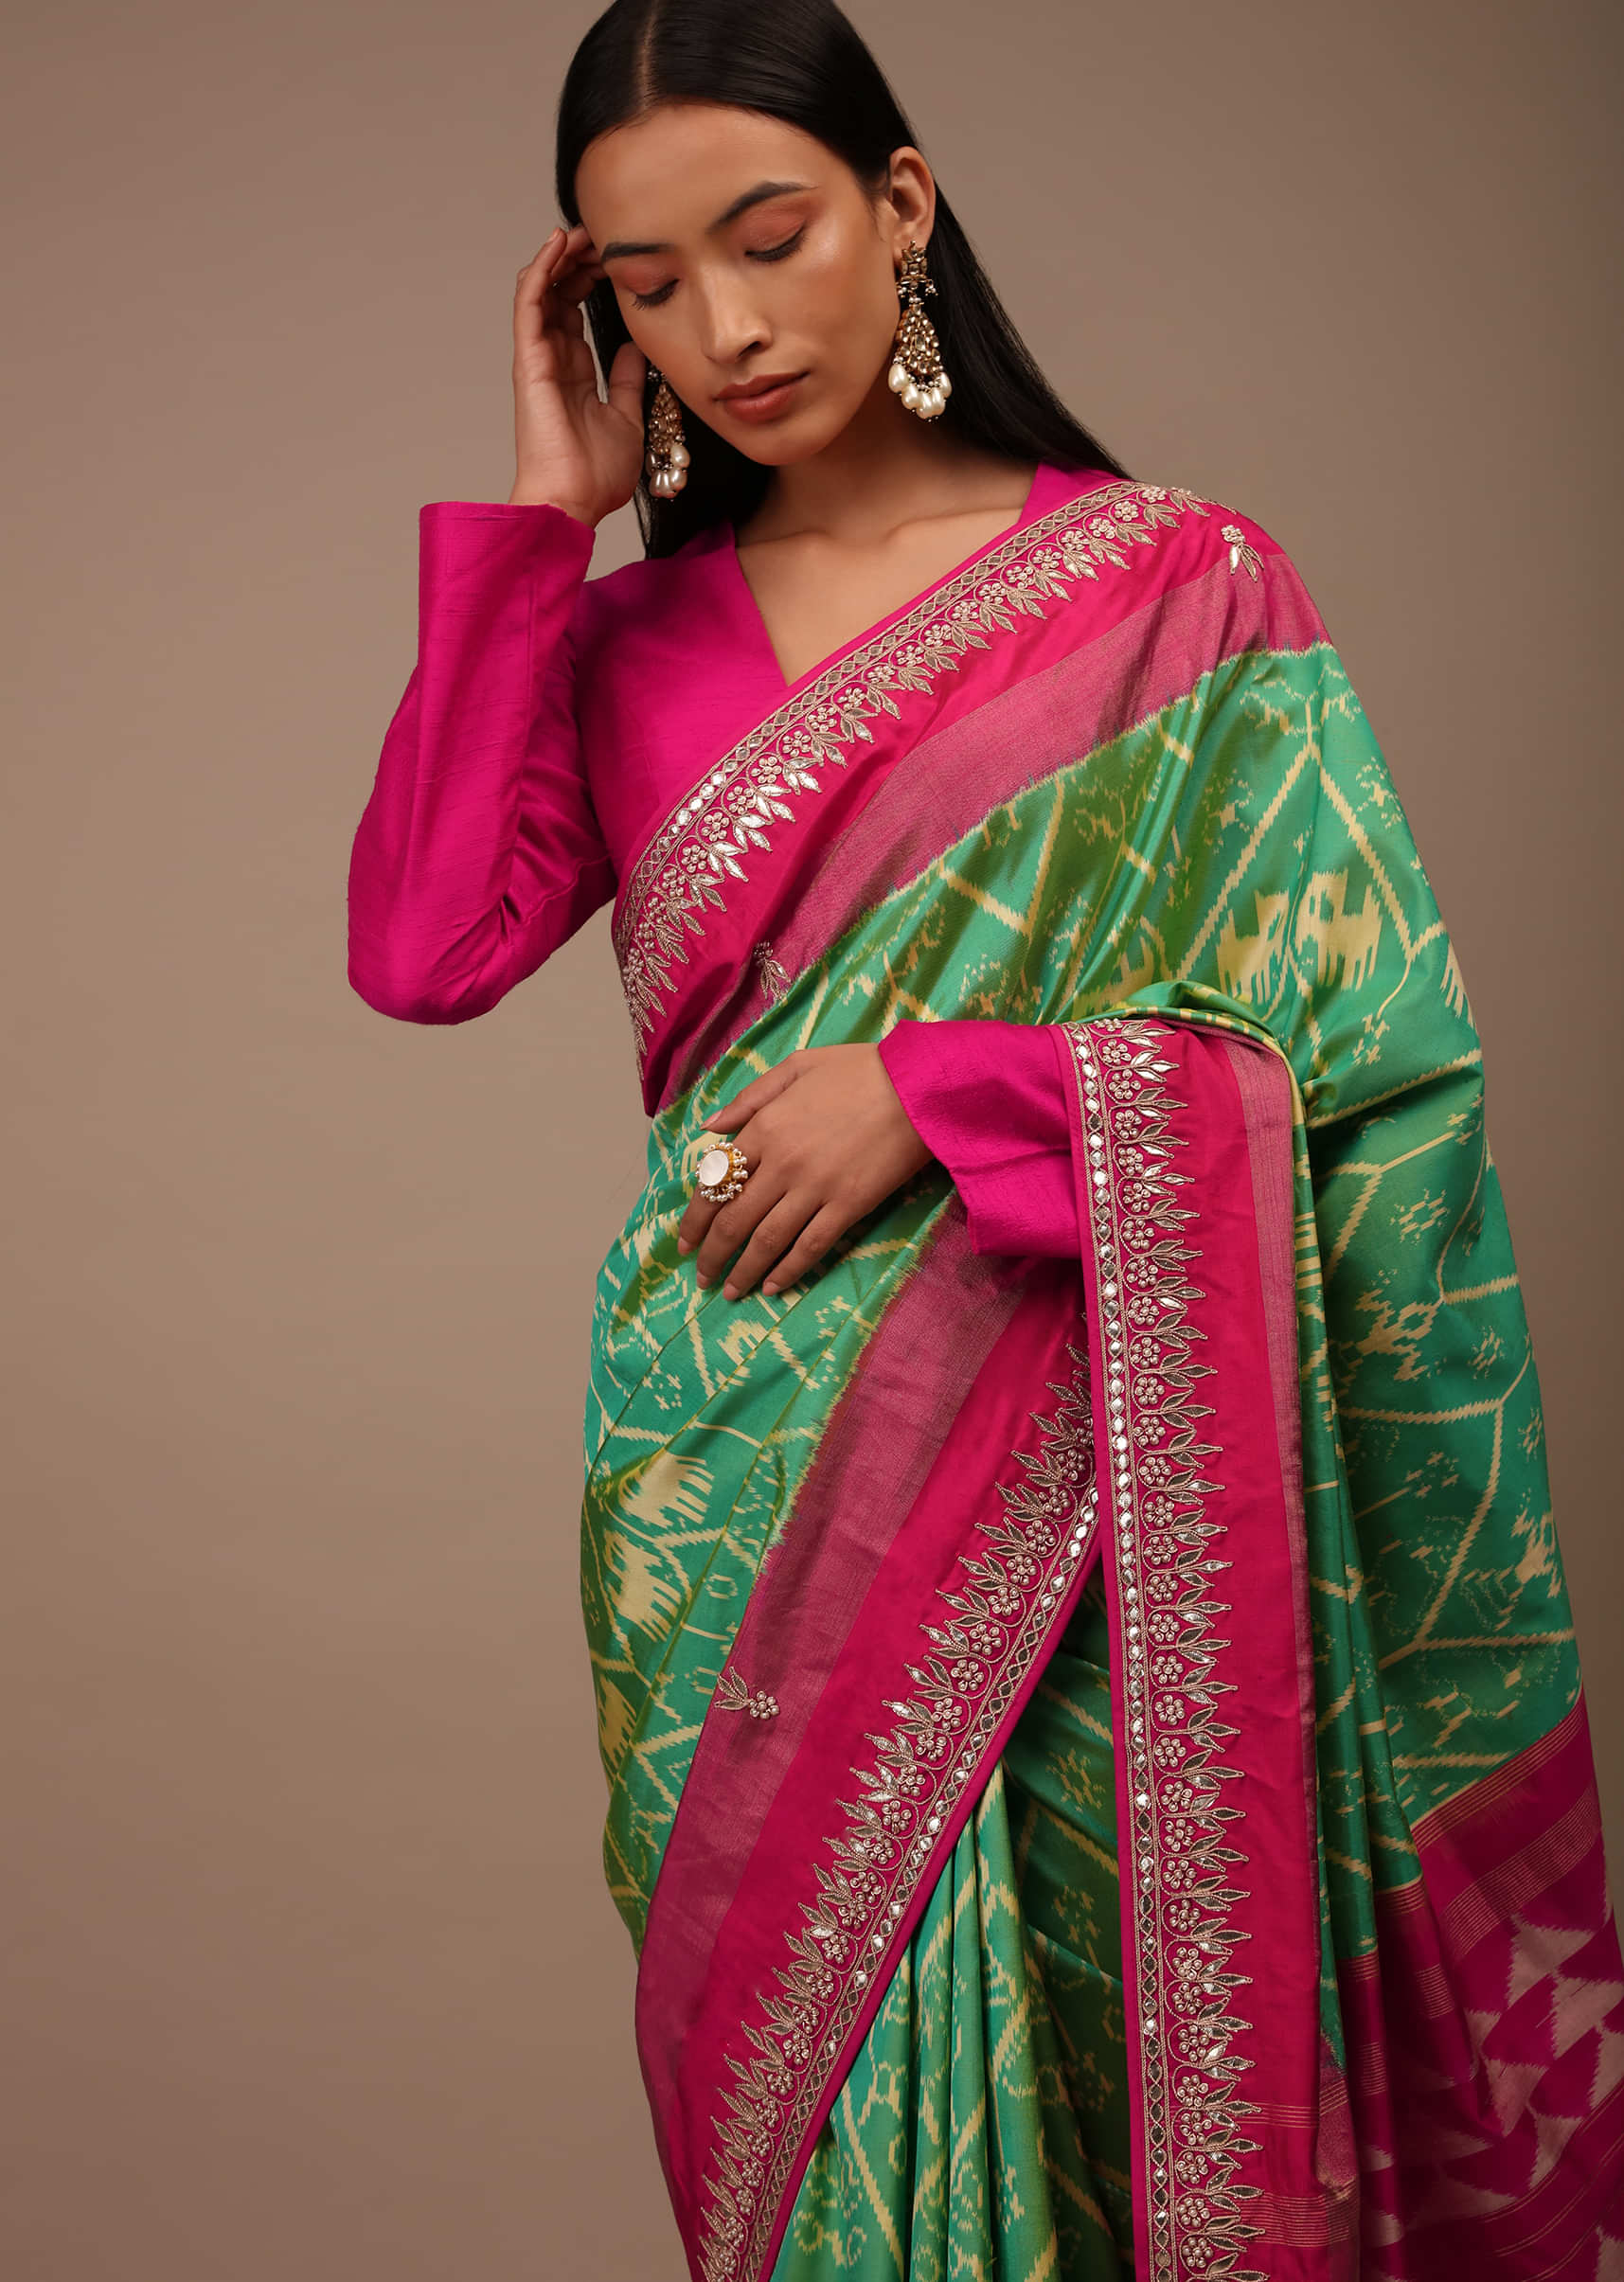 Green And Yellow Two Toned Saree In Silk With Pure Patola Woven Jaal And Gotta Patti Embroidered Border